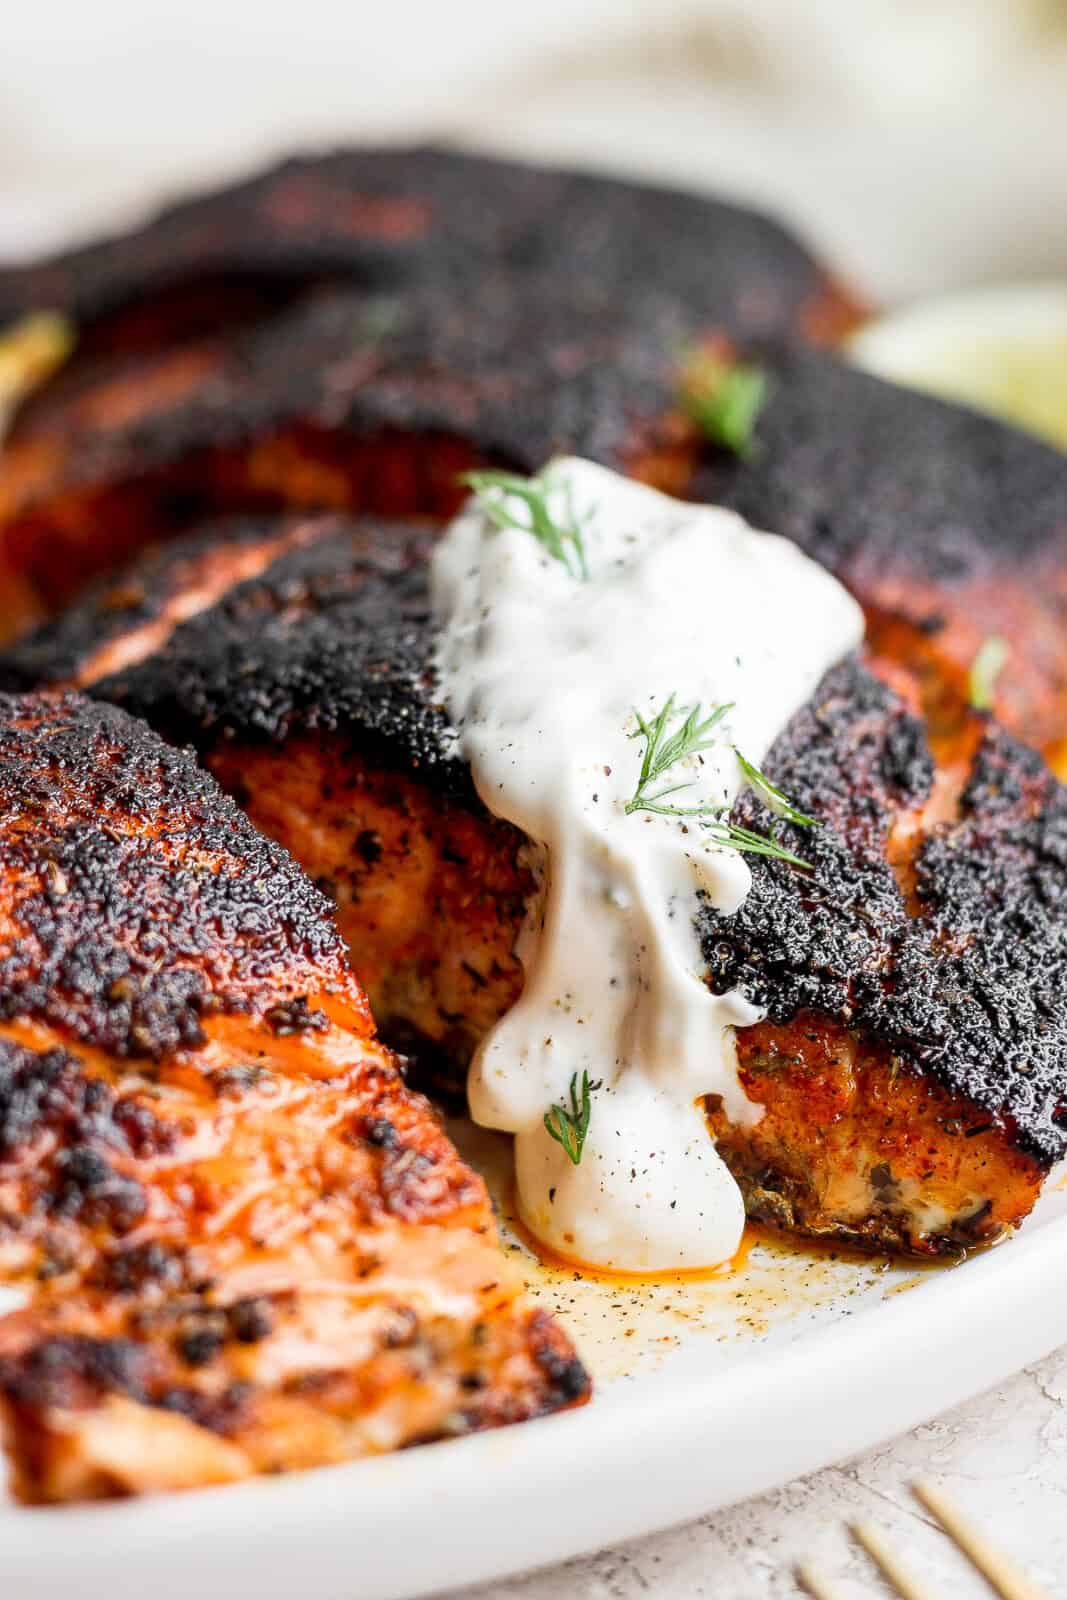 Close-up look at the blackened salmon fillets with a dollop of dill sauce on top.